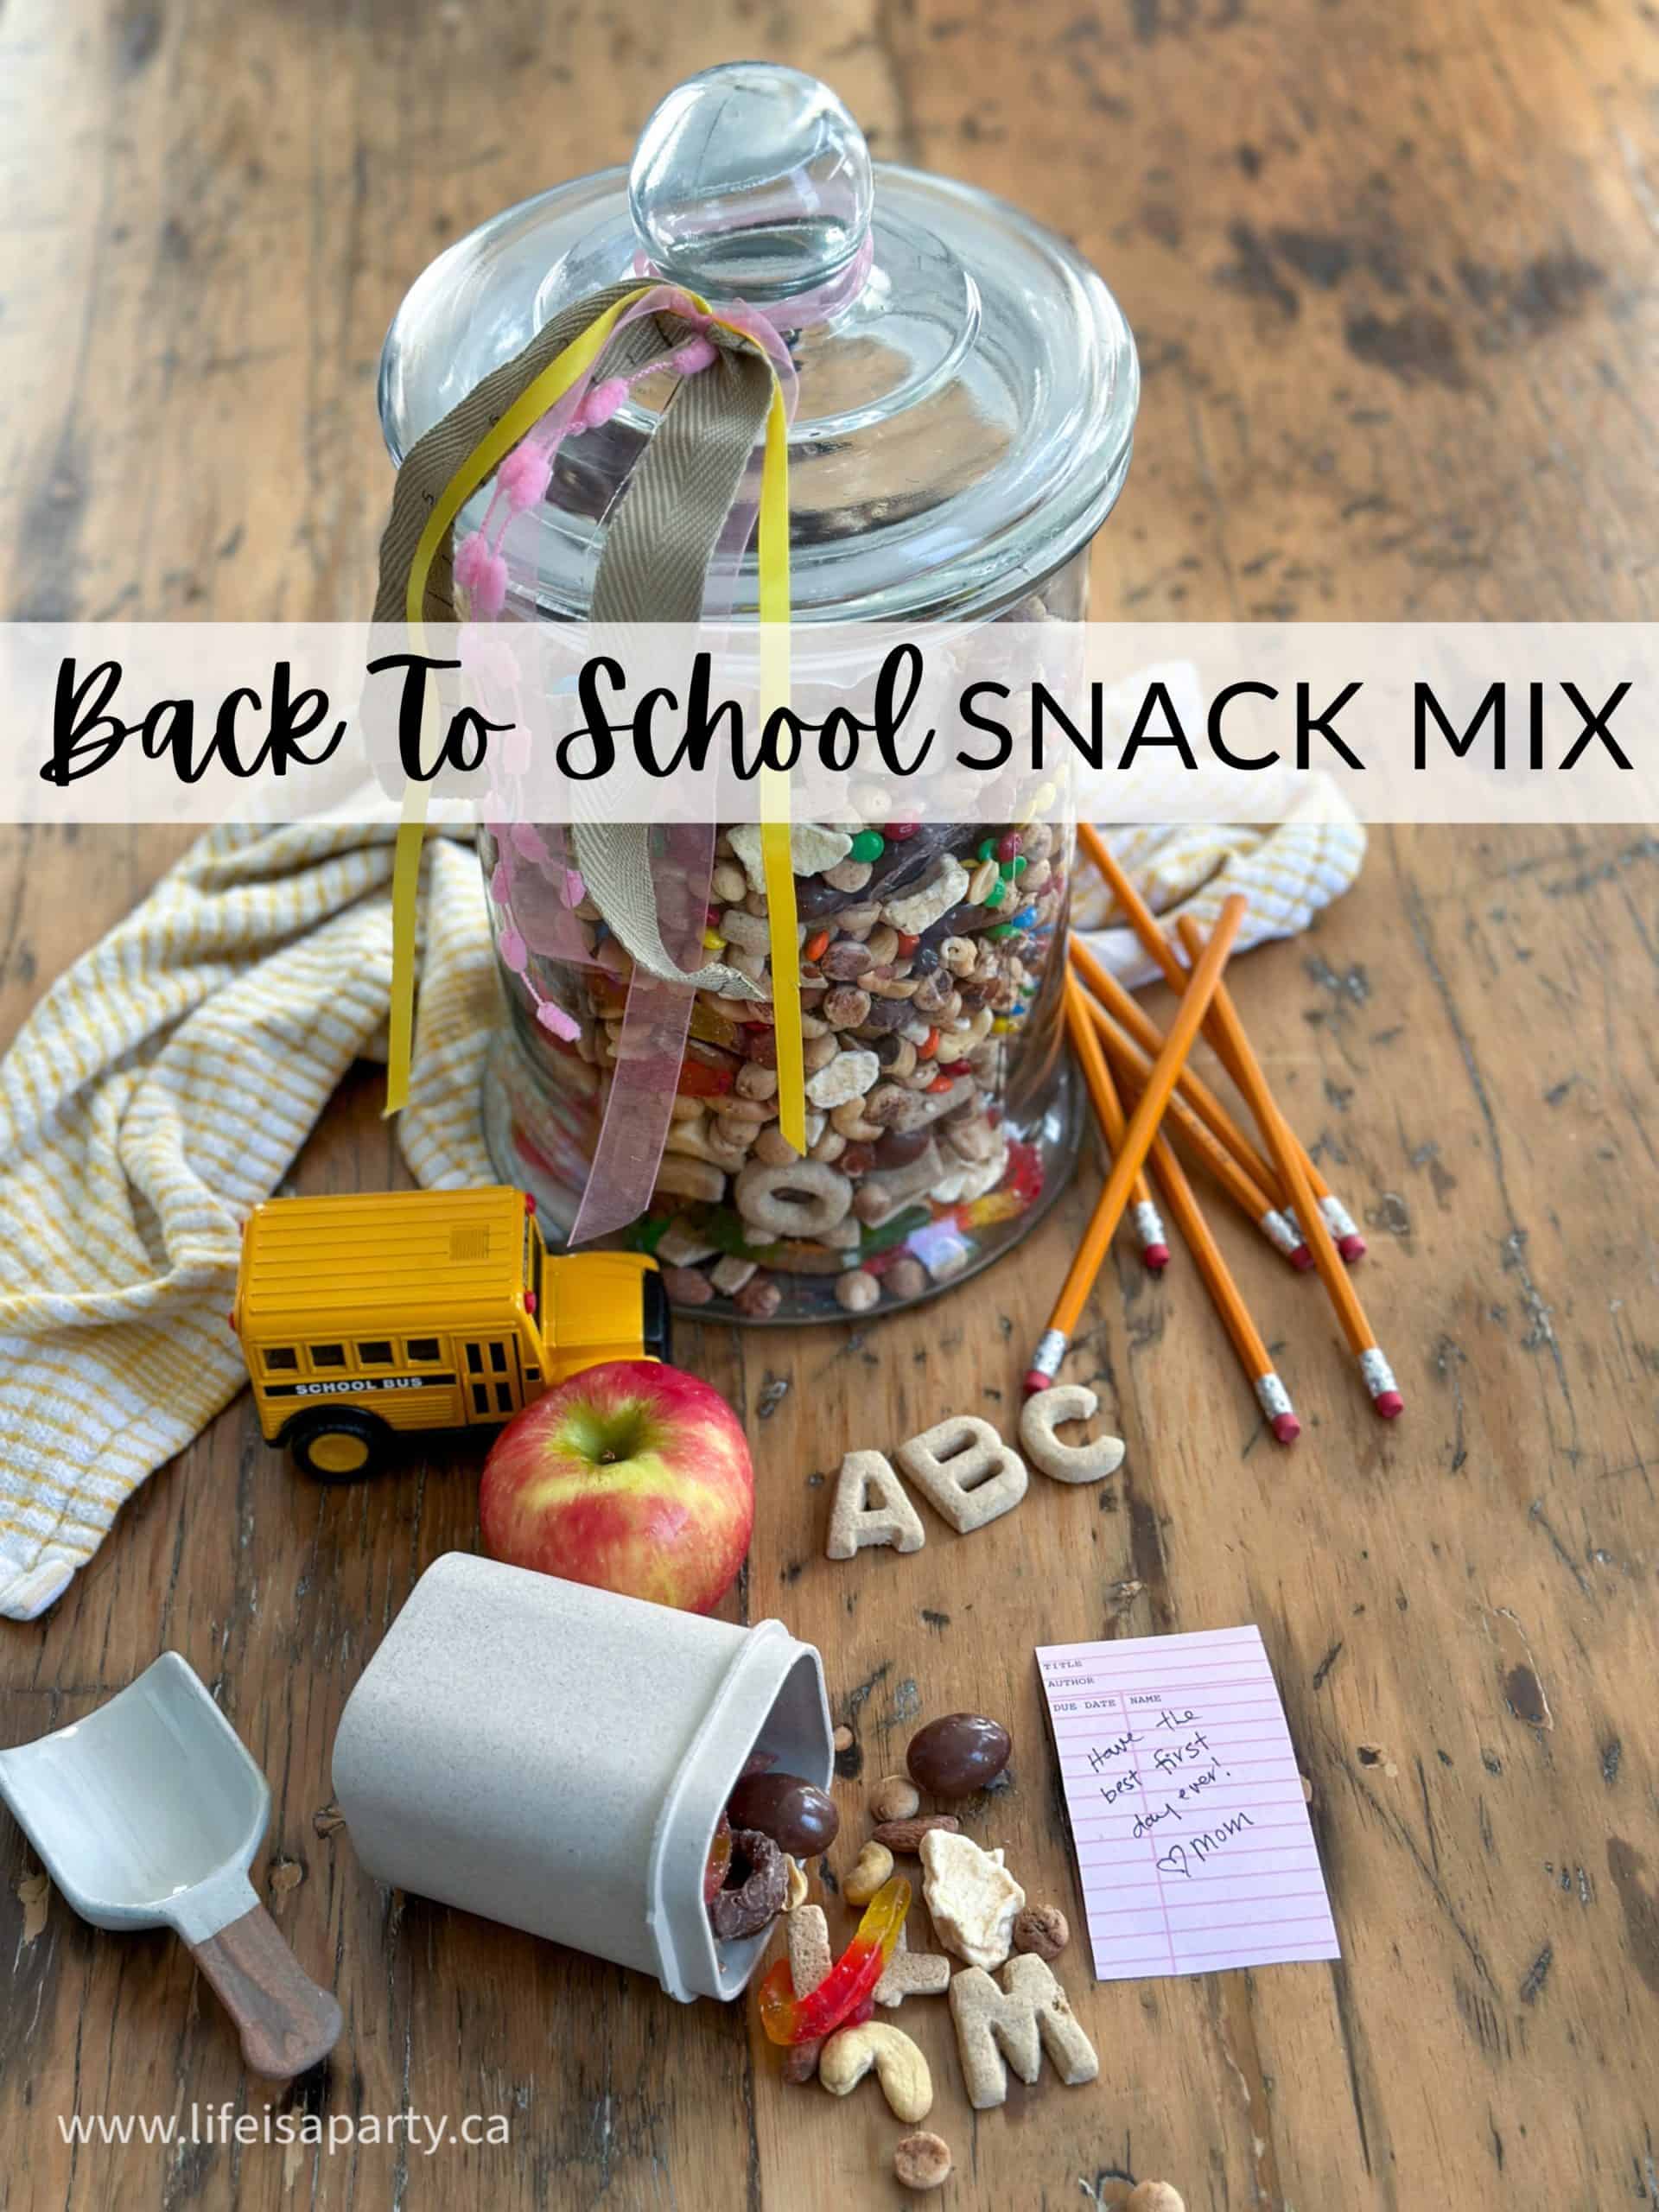 Back To School Snack Mix: alphabet cookies, book worm gummy worms, freeze dried apples, mini cookies, and more make this the perfect treat.